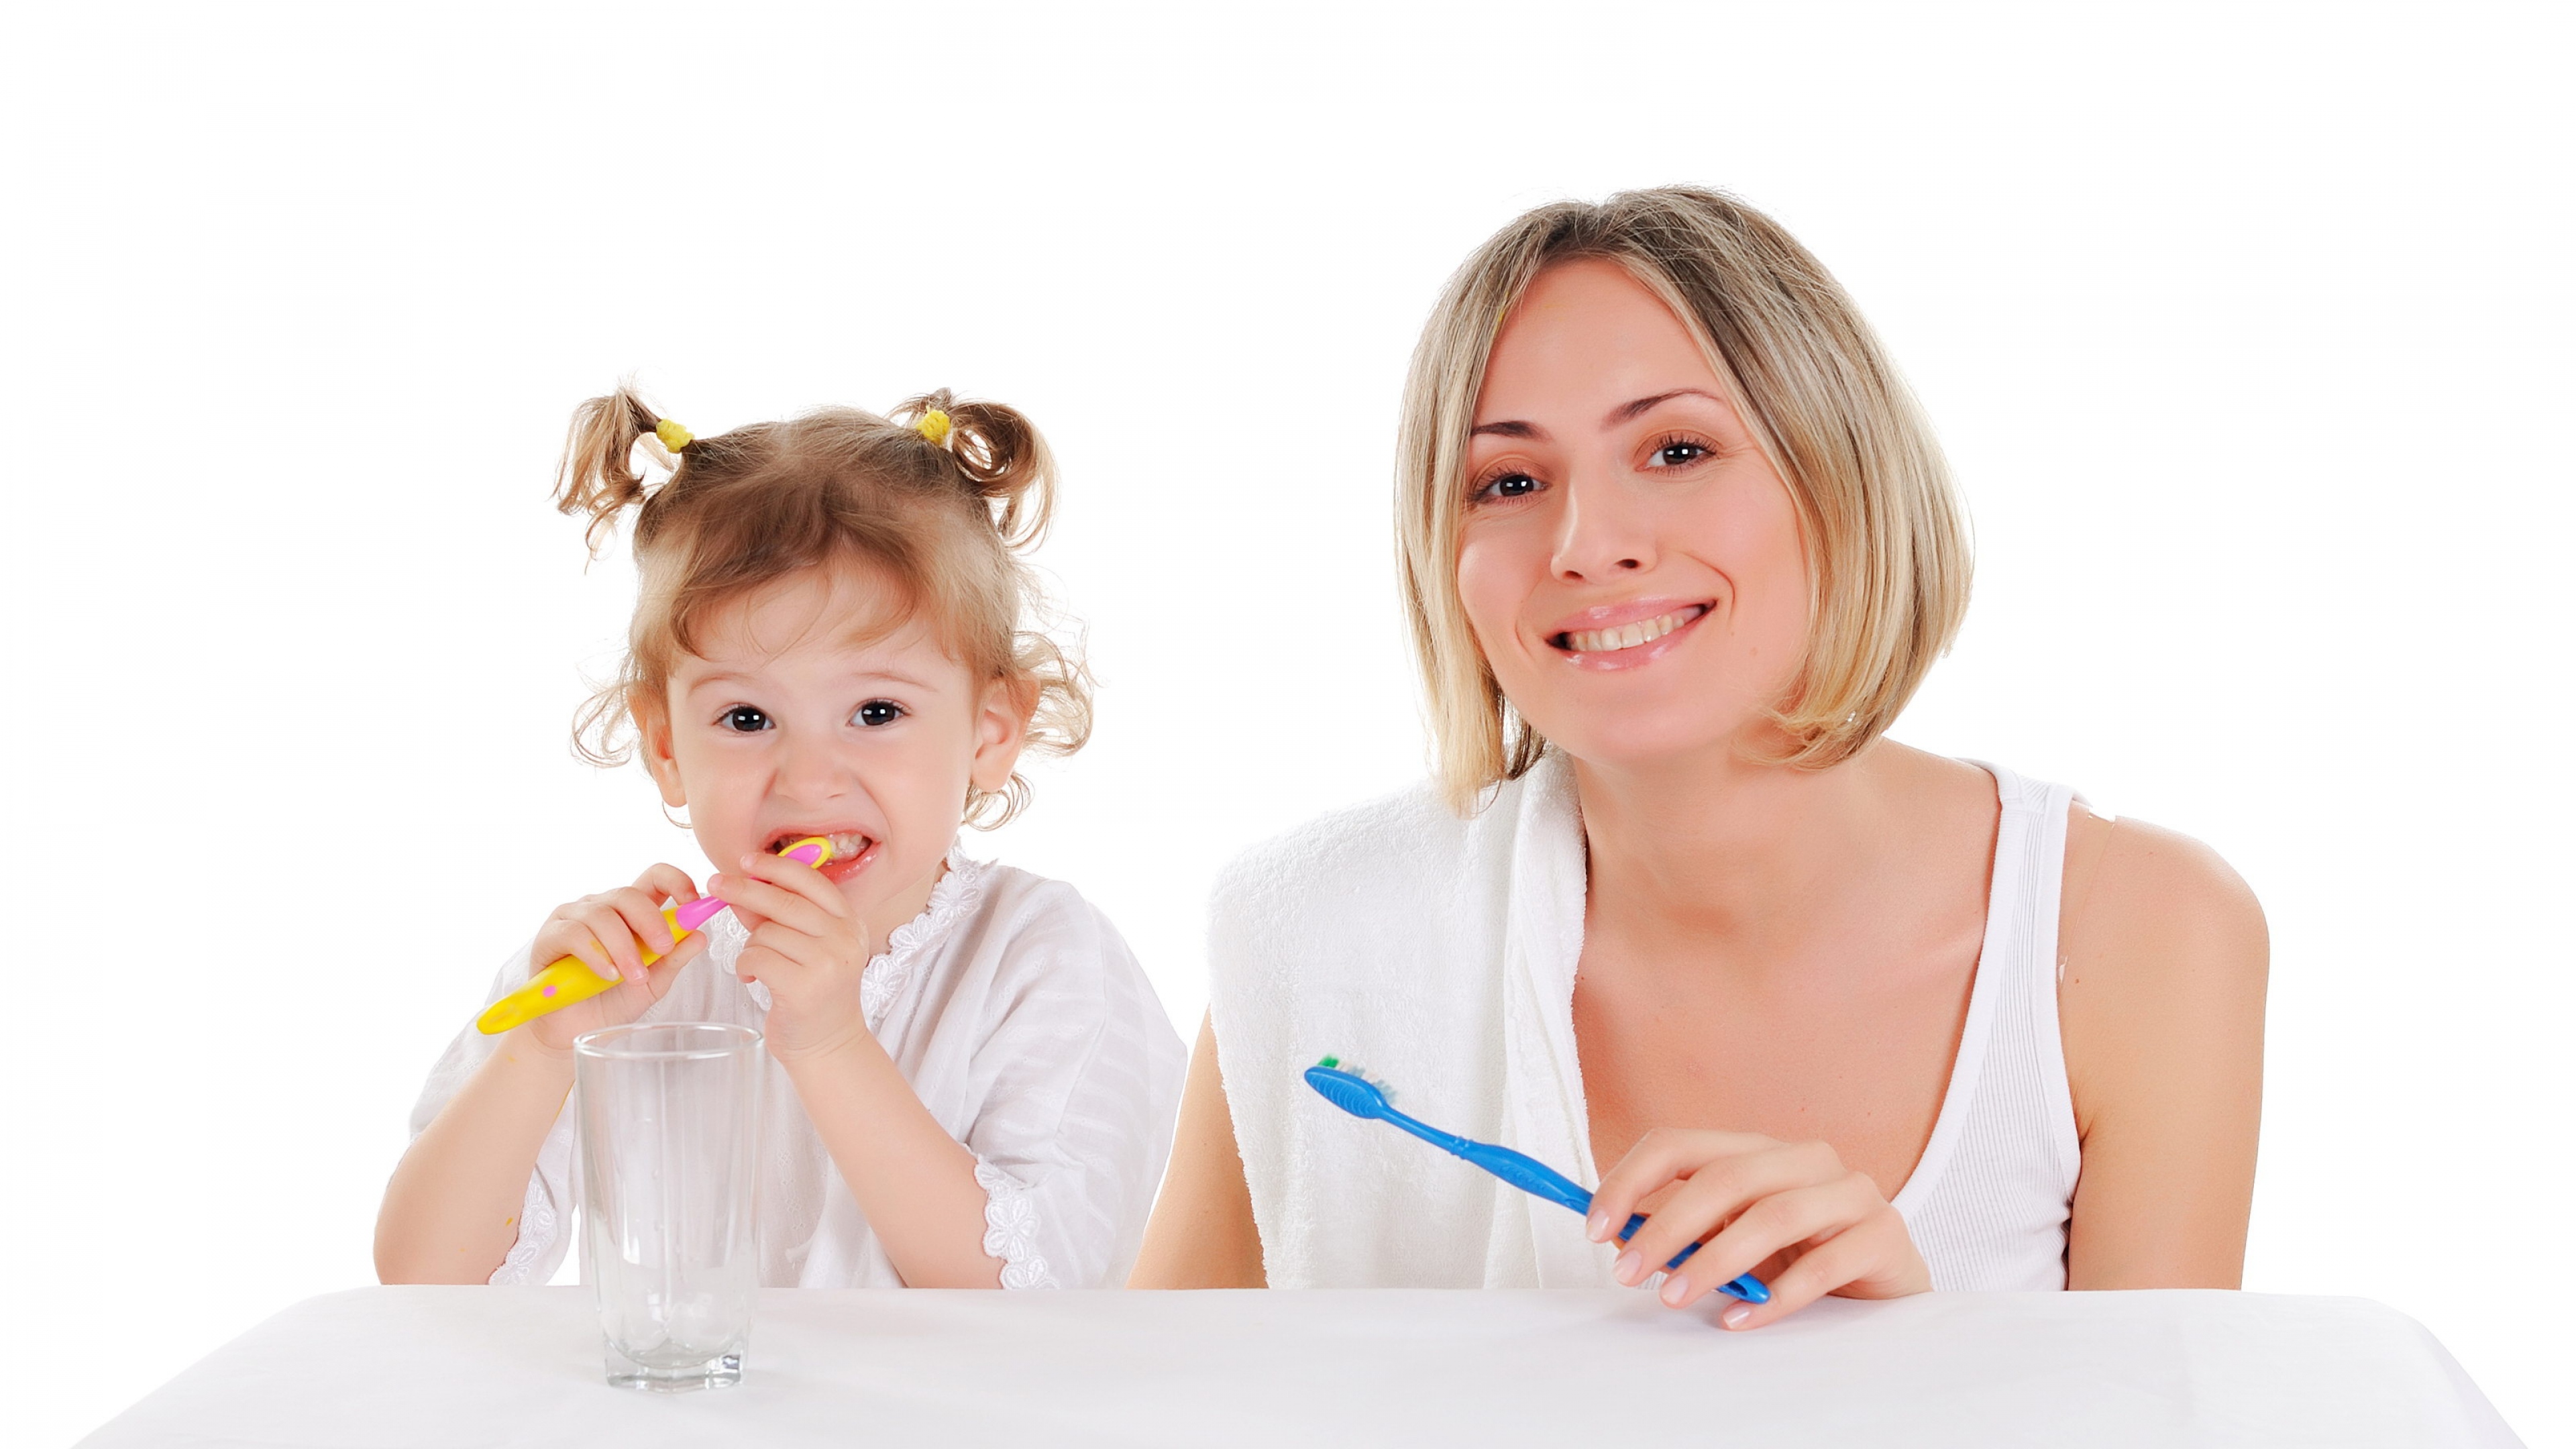 teeth_cleaning_hygiene_mother_daughter_white_brush_80257_3840x2160